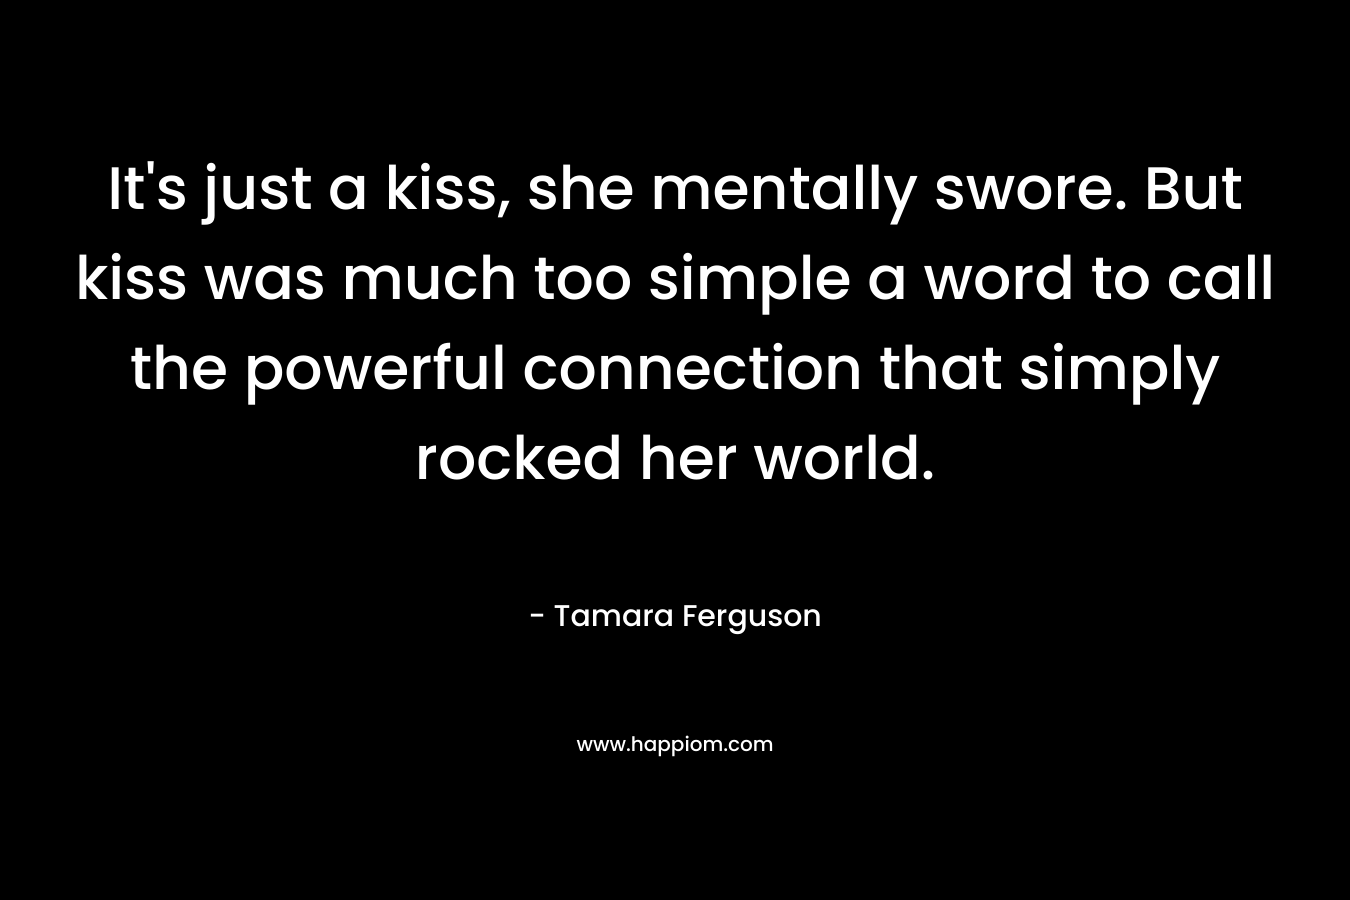 It’s just a kiss, she mentally swore. But kiss was much too simple a word to call the powerful connection that simply rocked her world. – Tamara Ferguson